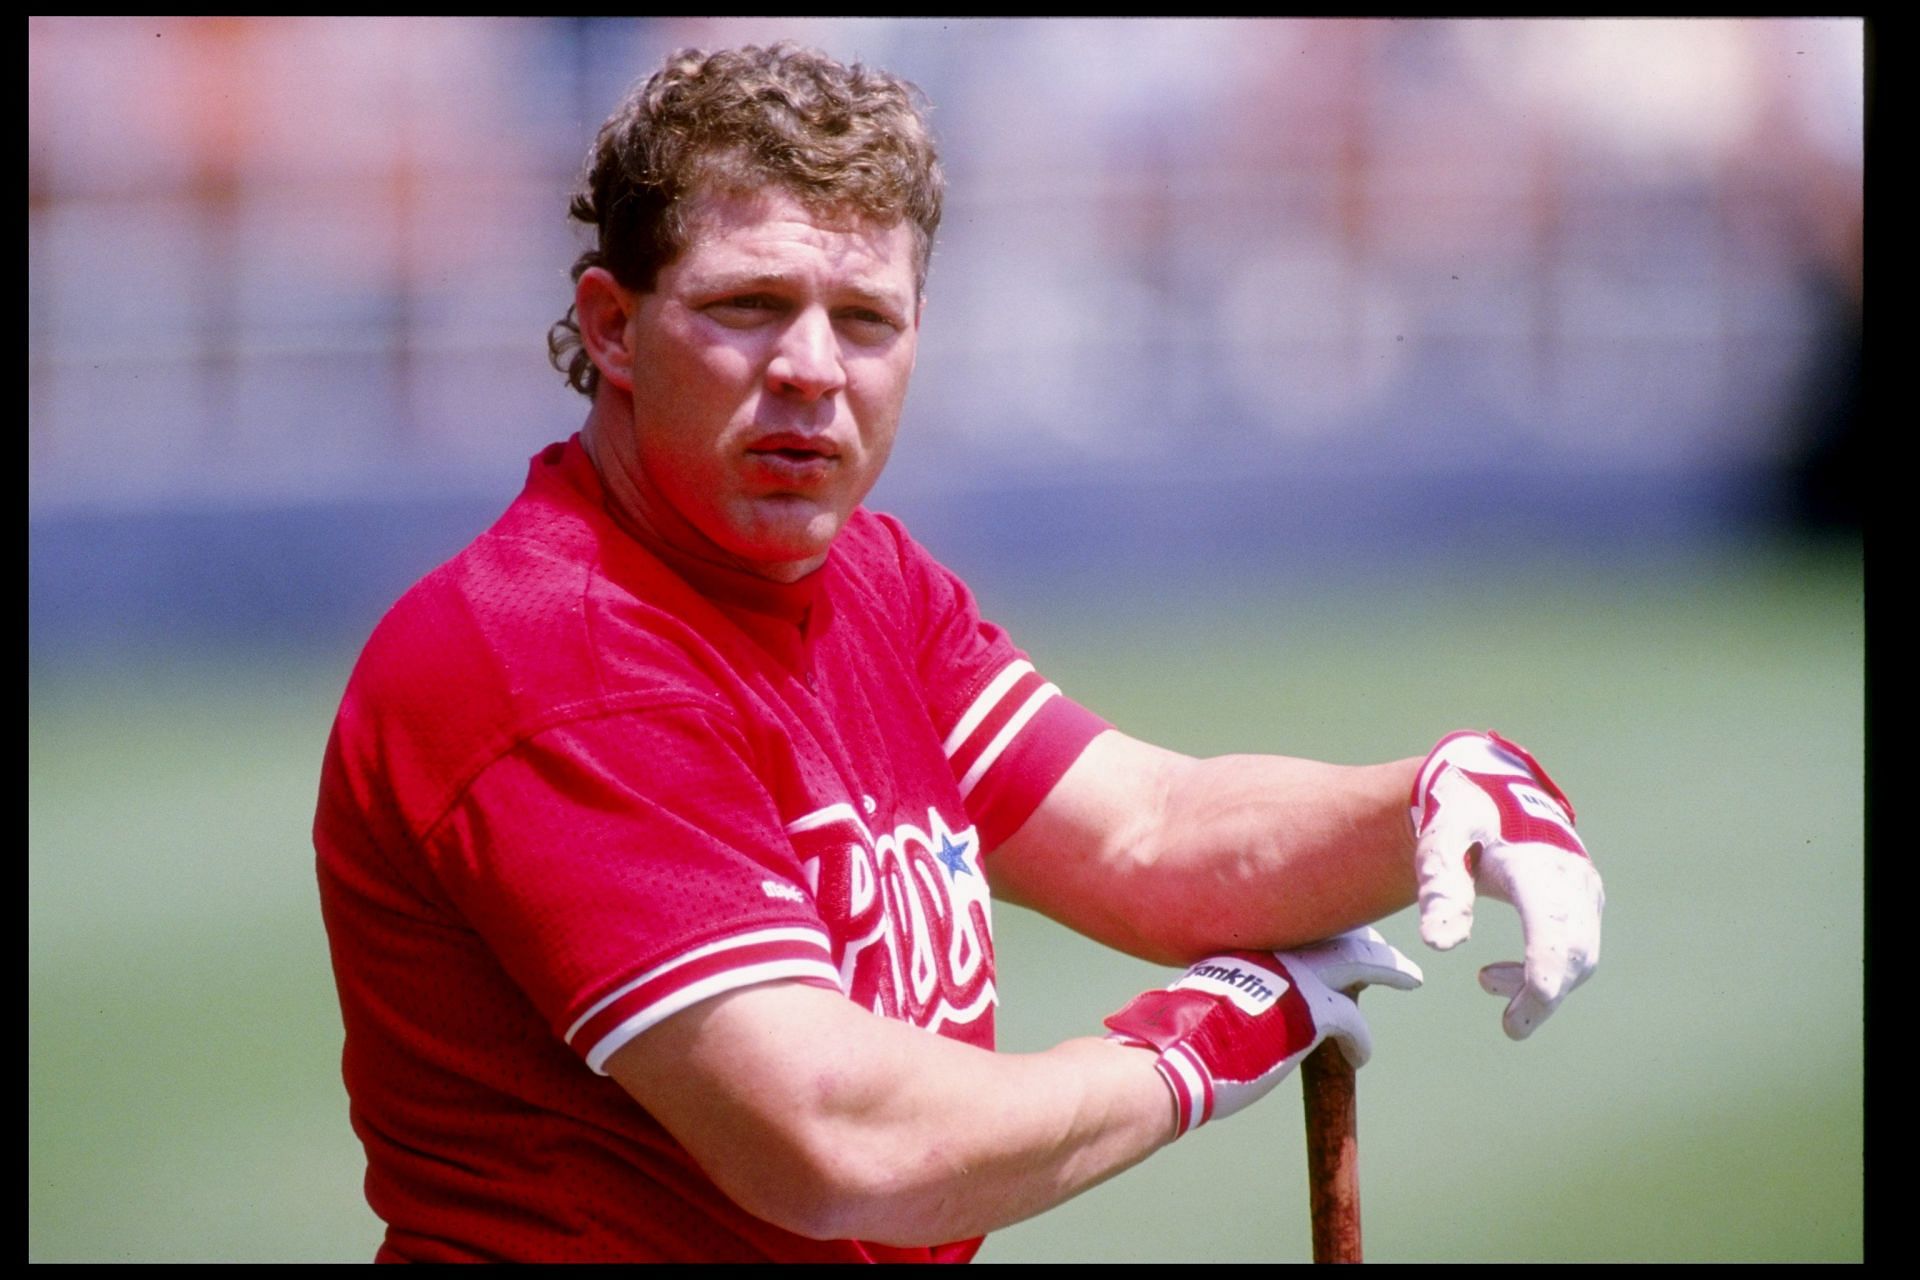 29 Apr 1993:Outfielder Lenny Dykstra of the Philadelphia Phillies stands on the field during a game against the San Diego Padres at Jack Murphy Stadium in San Diego, California.